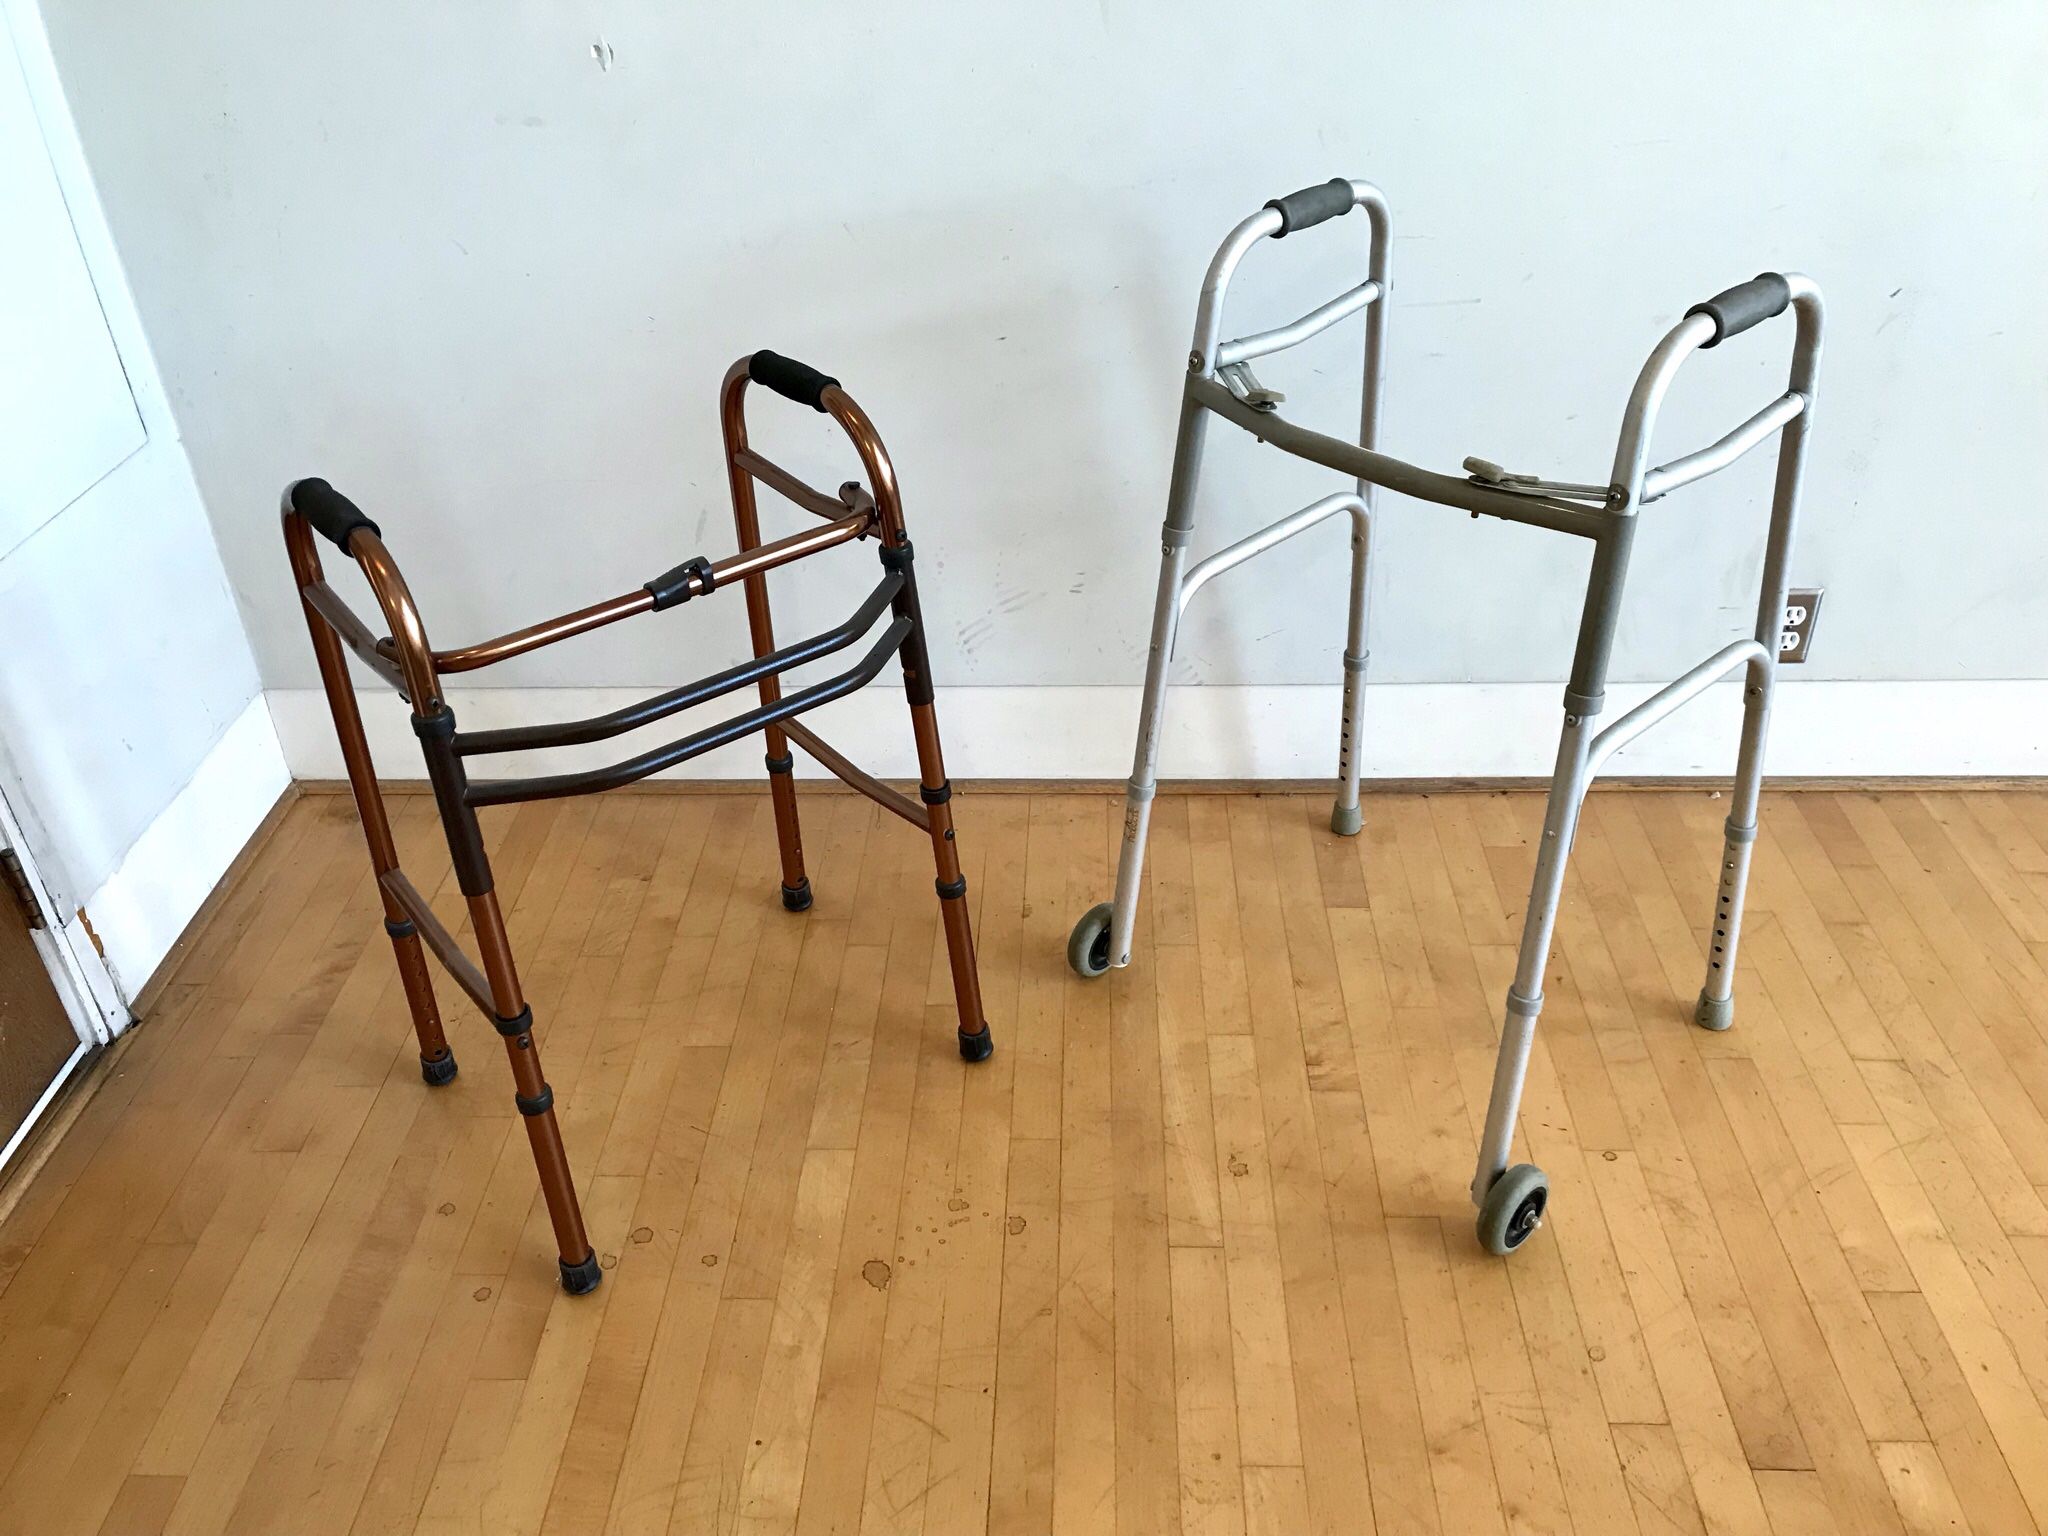 2 Adult Walkers Adjustable Aluminum lightweight folding one with wheels great condition $20 Each in Ontario 91762